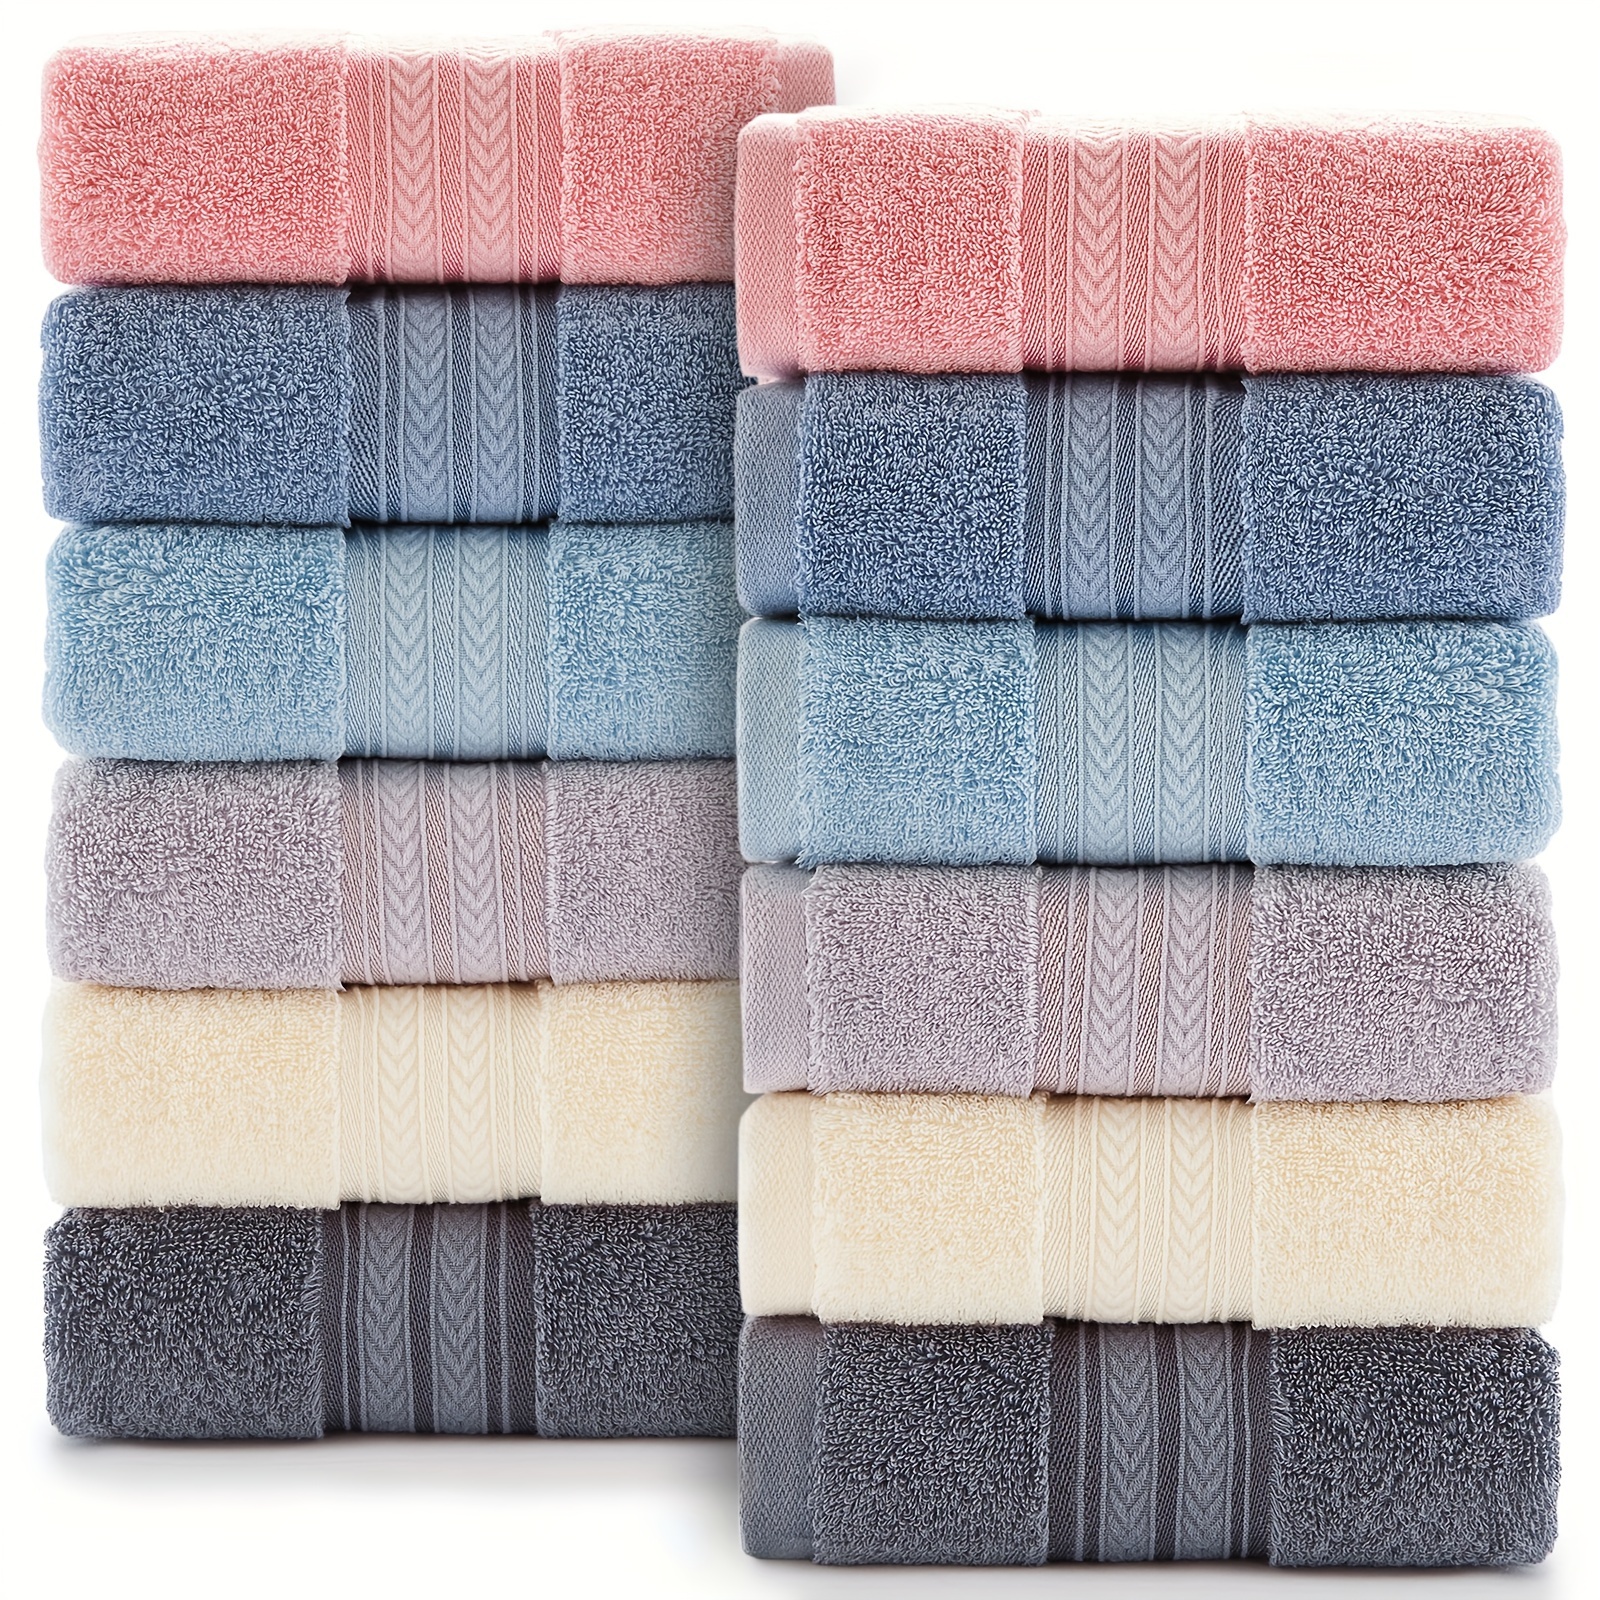 

12pcs Cotton Hand Towel Set, Absorbent & Quick-drying Face Towel, Super Soft & Thickened Towel, For Home Bathroom, Ideal Bathroom Supplies